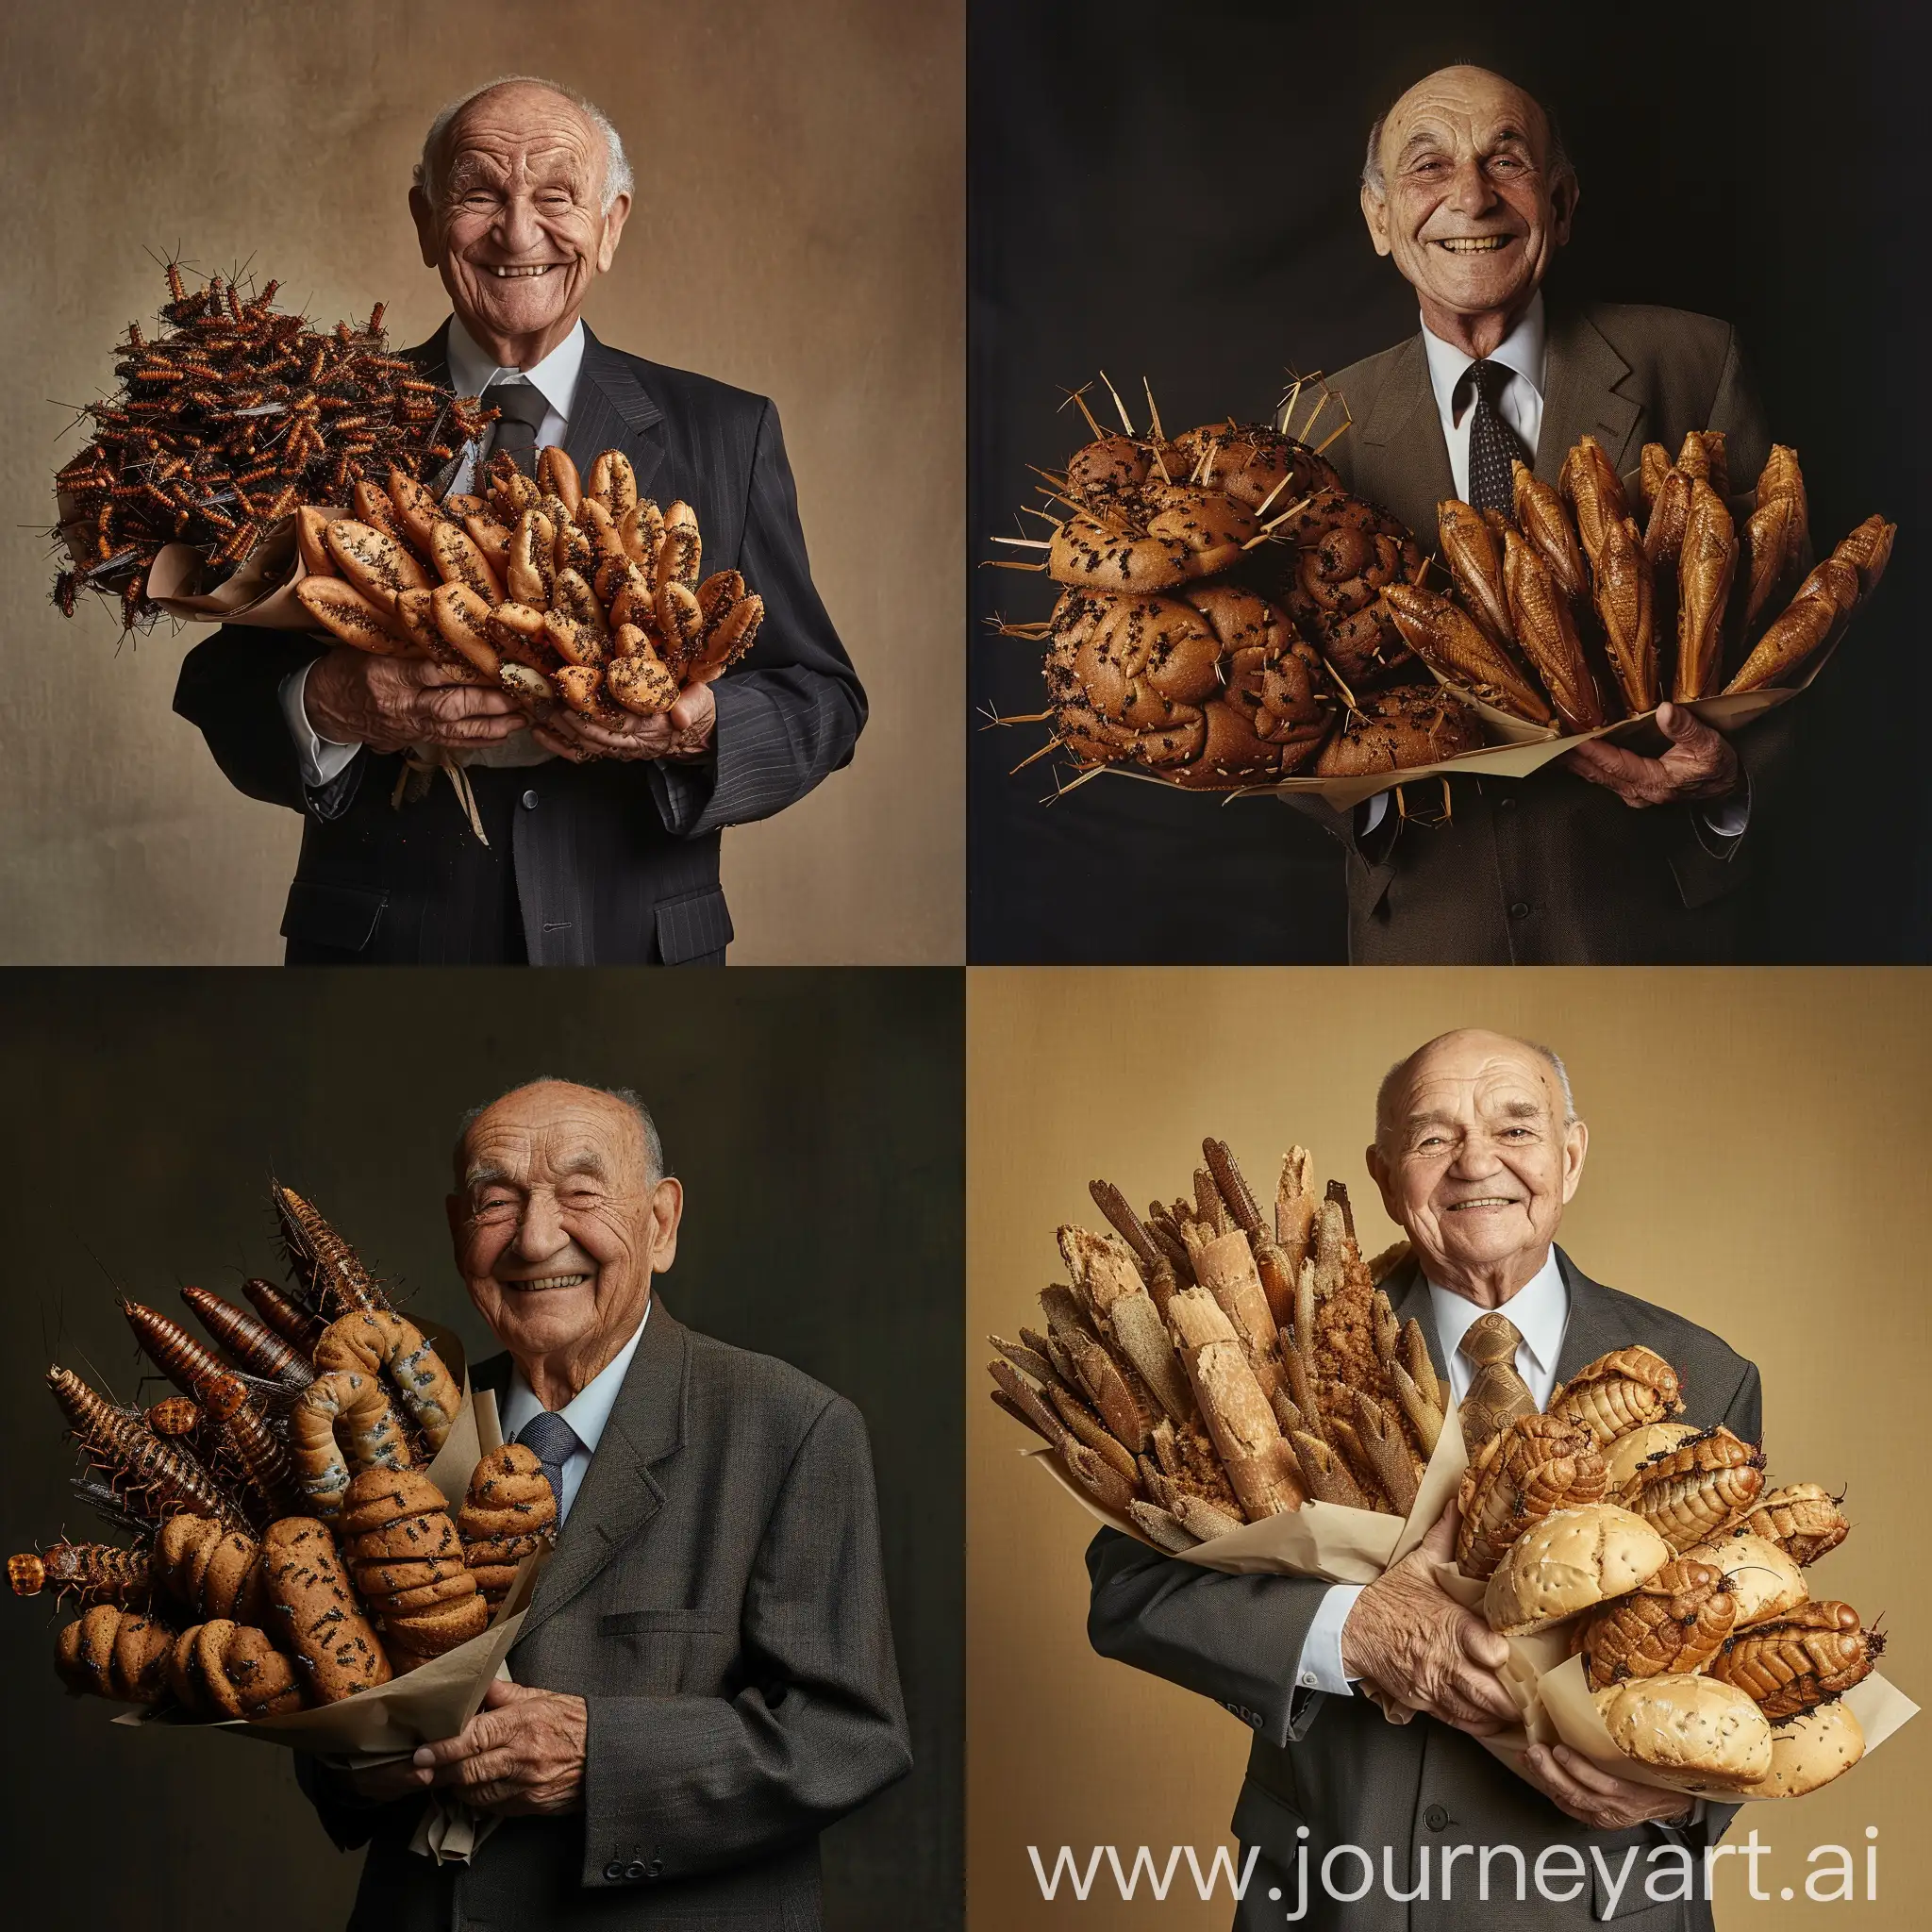 an elderly smiling man in a business suit holds a large bouquet of cricket bread and dung fly bread